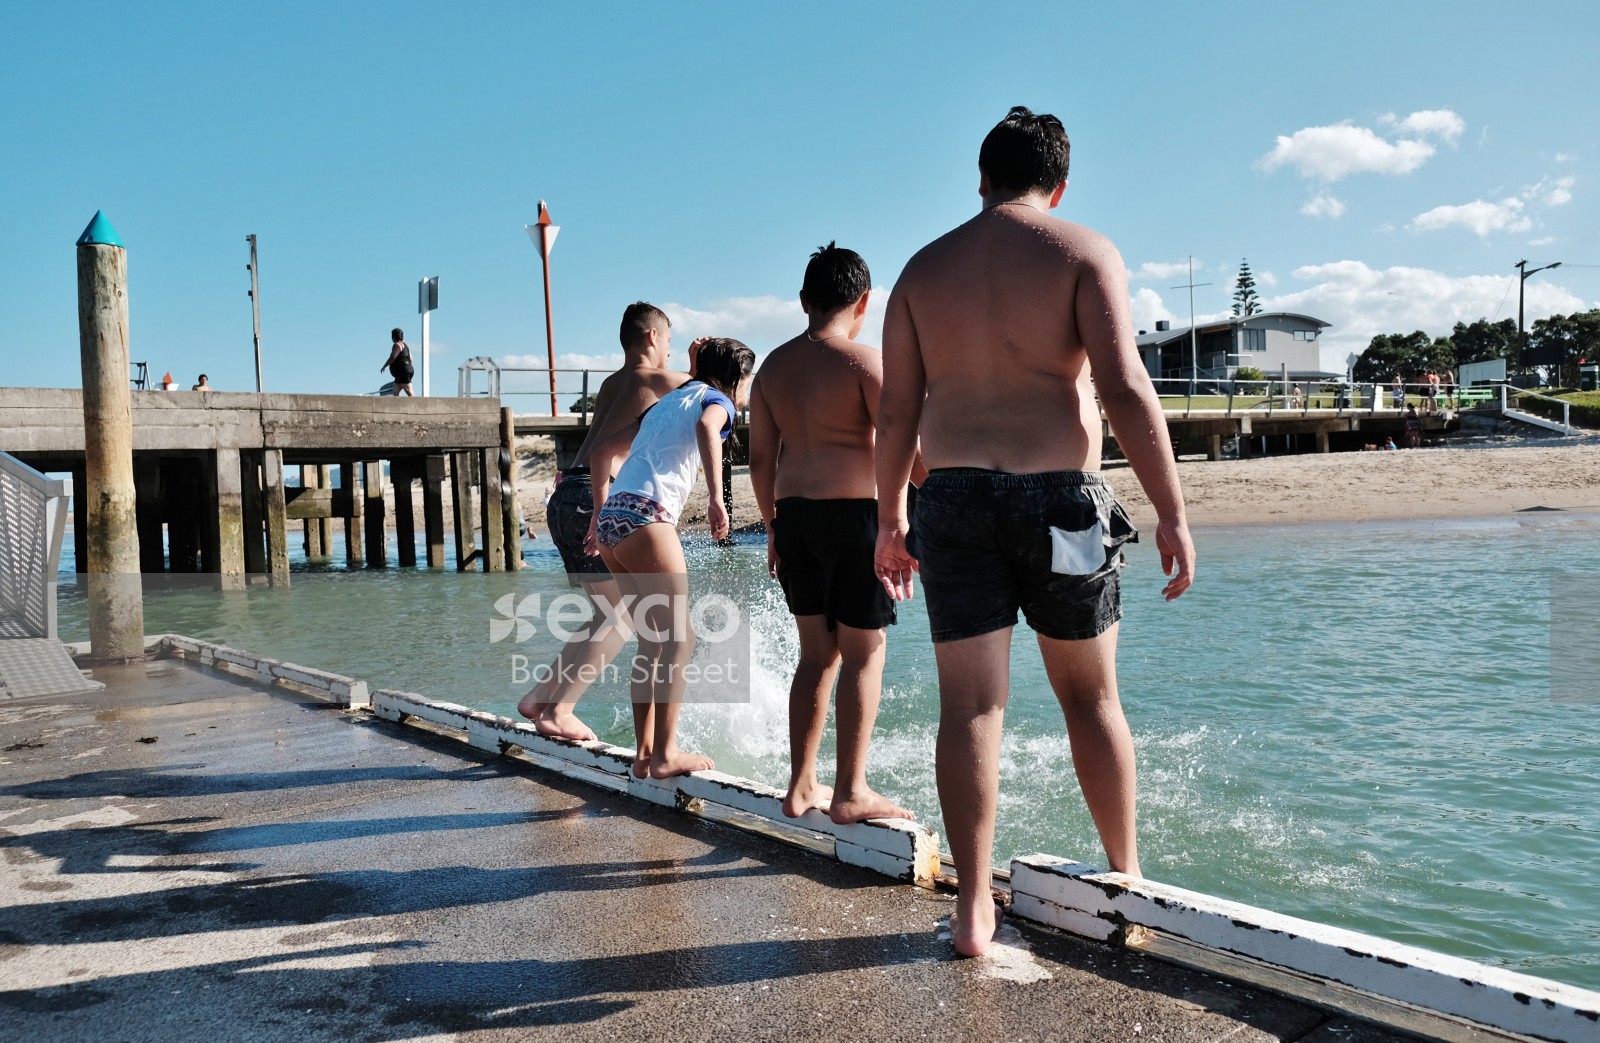 Boys and a girl jumping off a pier